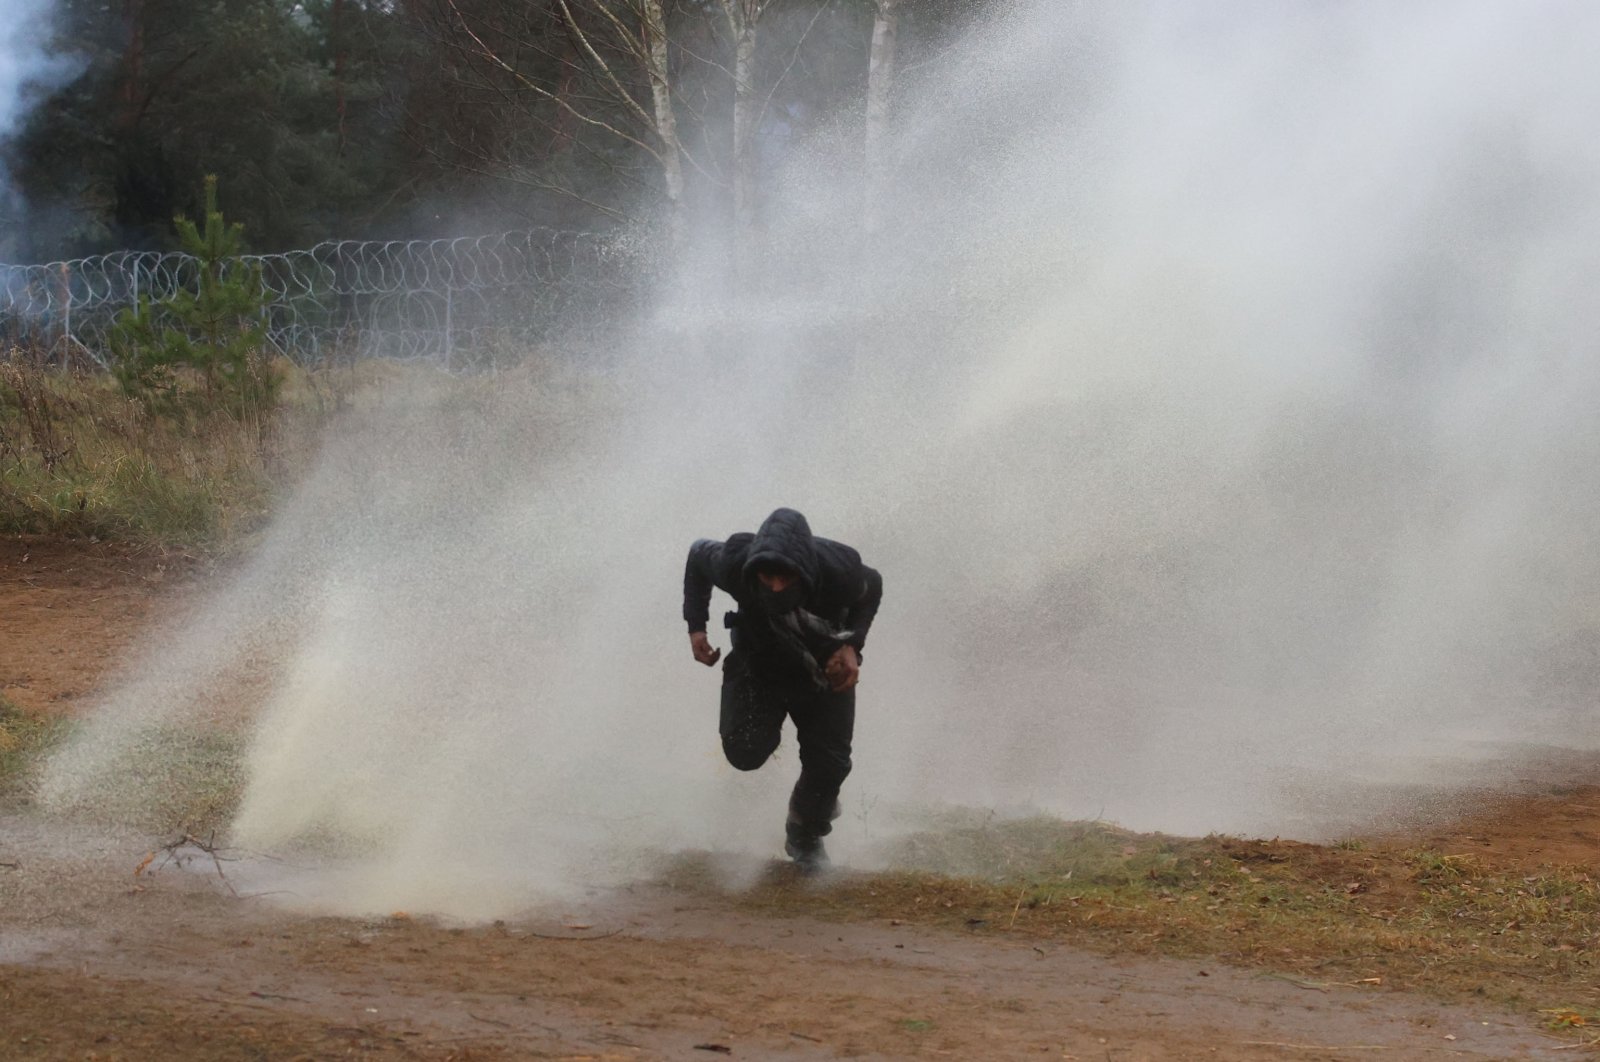 A man runs away from a water cannon used by Polish law enforcement officers against migrants attempting to break into Poland at the Bruzgi-Kuznica border crossing on the Belarusian-Polish border, Nov. 16, 2021. (AFP Photo)